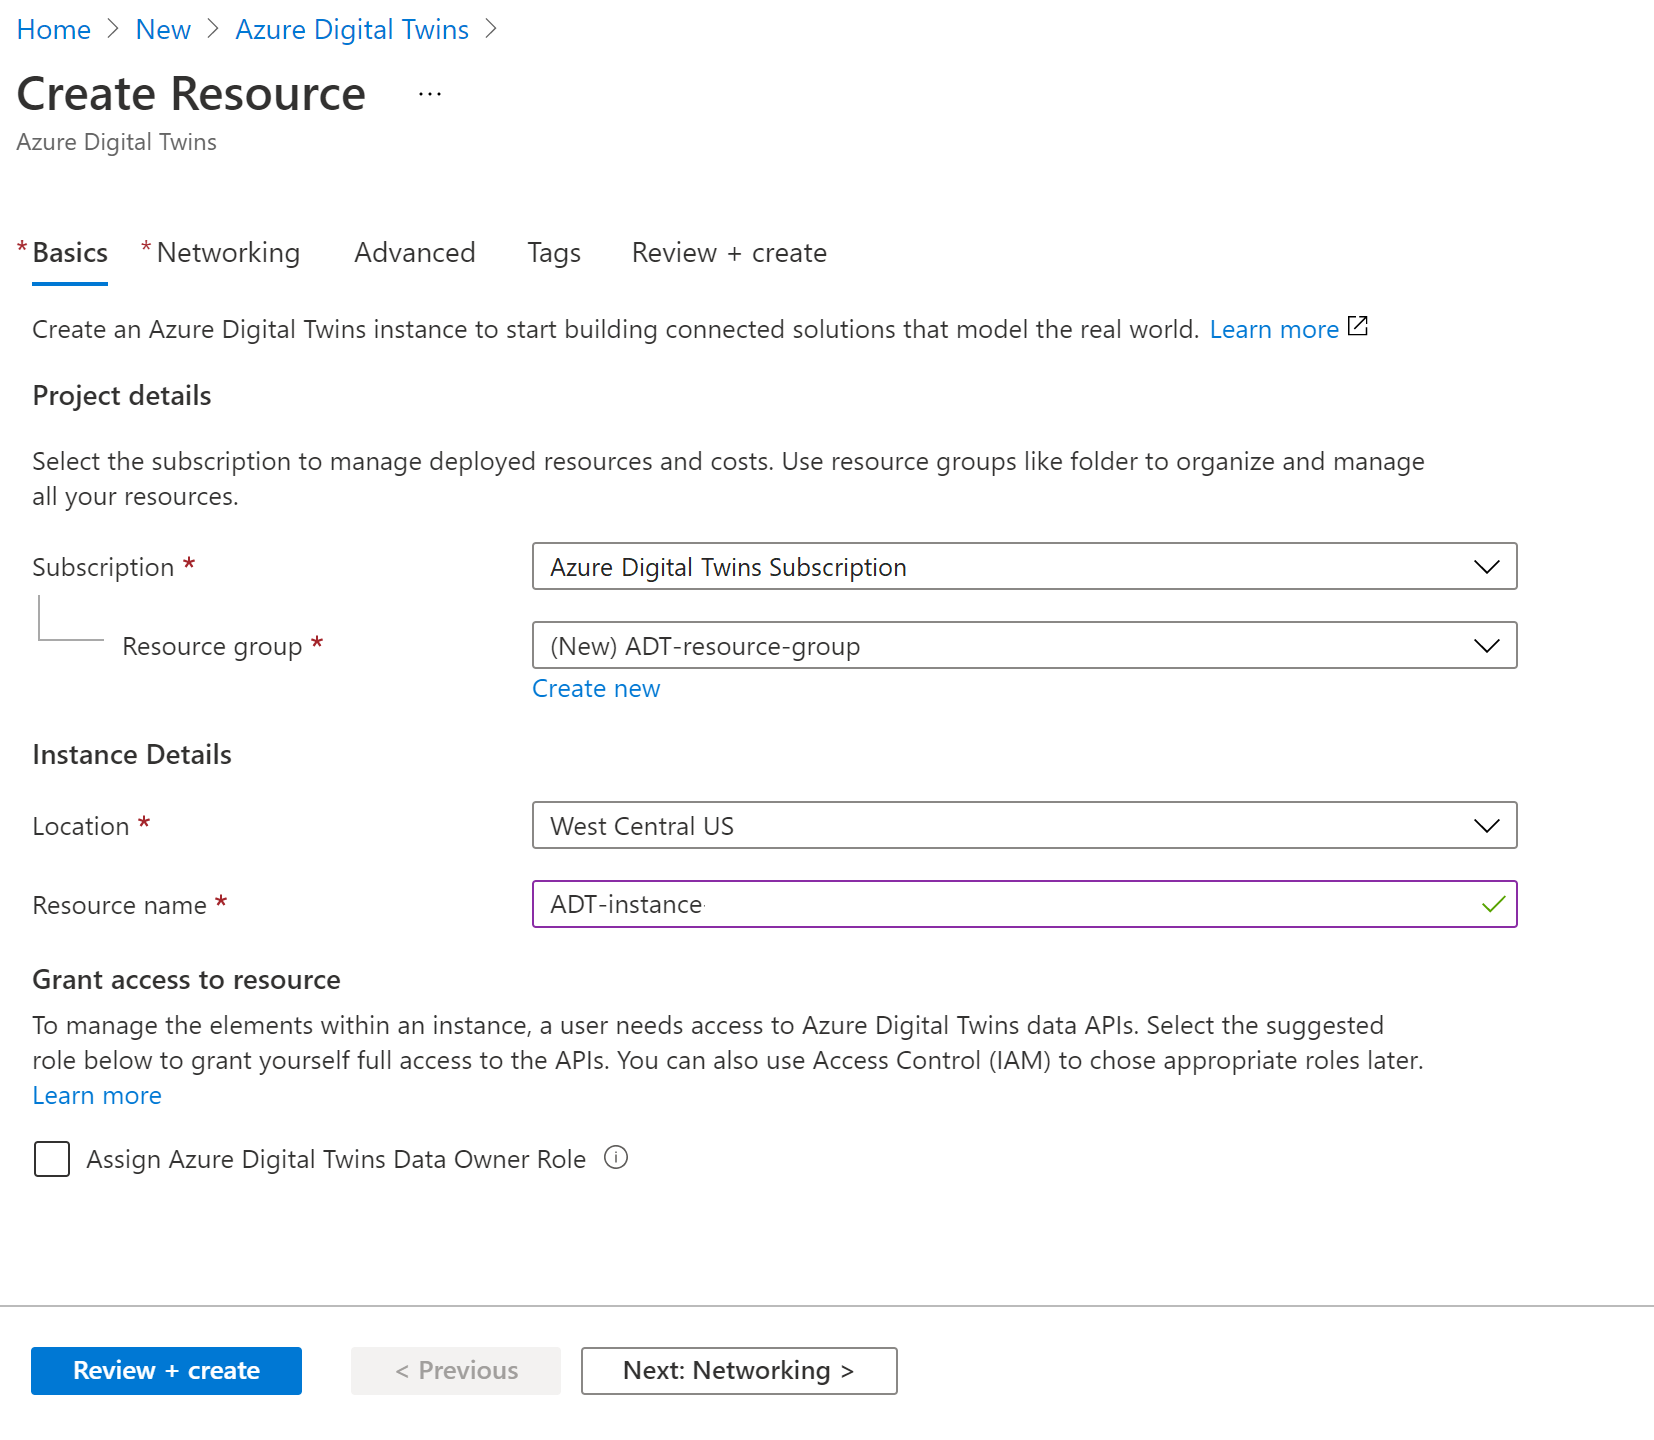 Screenshot of the Create Resource process for Azure Digital Twins in the Azure portal. The described values are filled in.